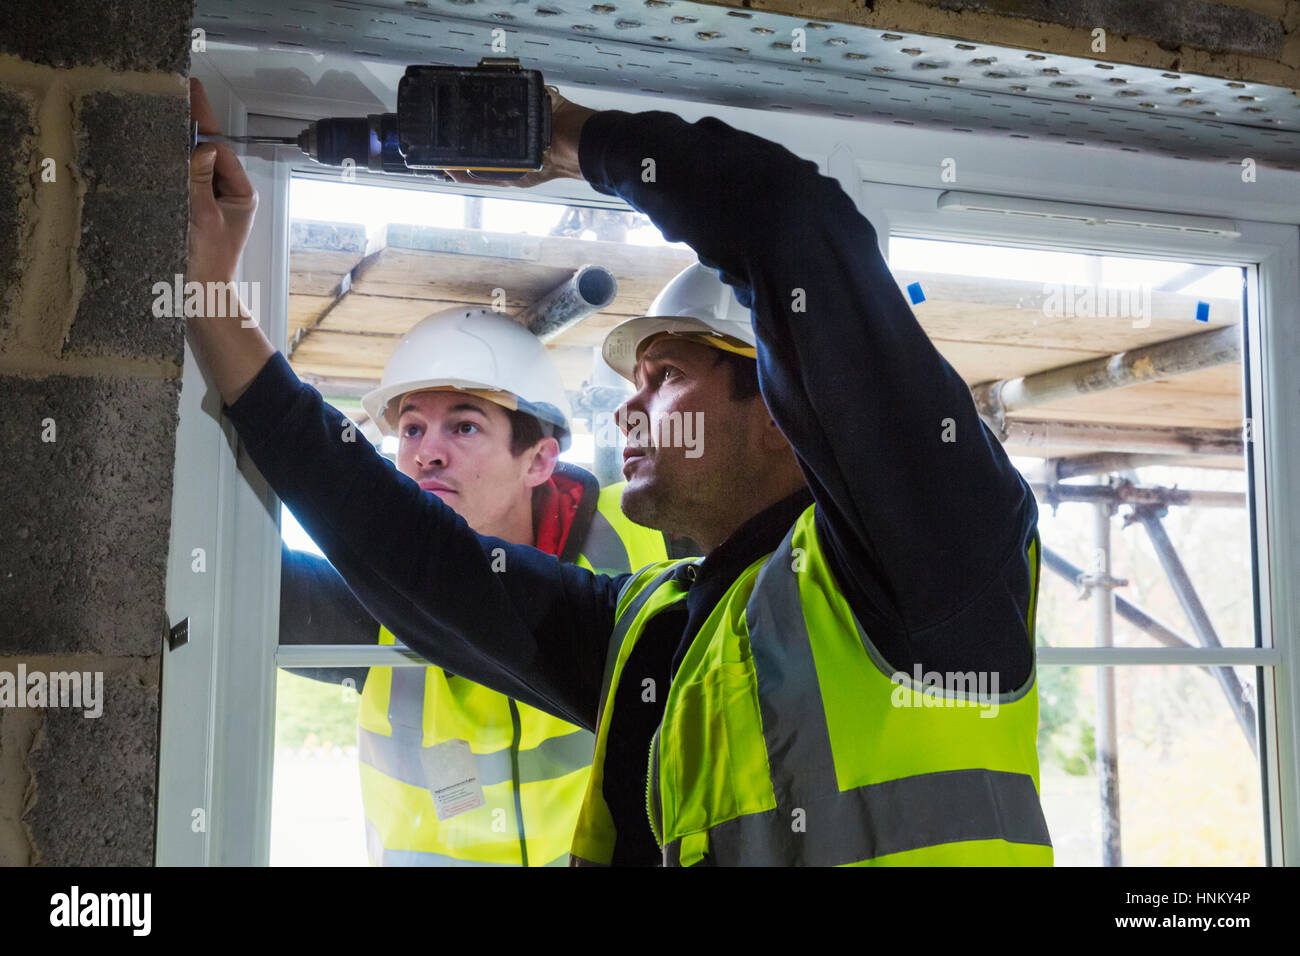 Two workmen on a construction site, builder in hard hat using an electric drill on a window frame. Stock Photo